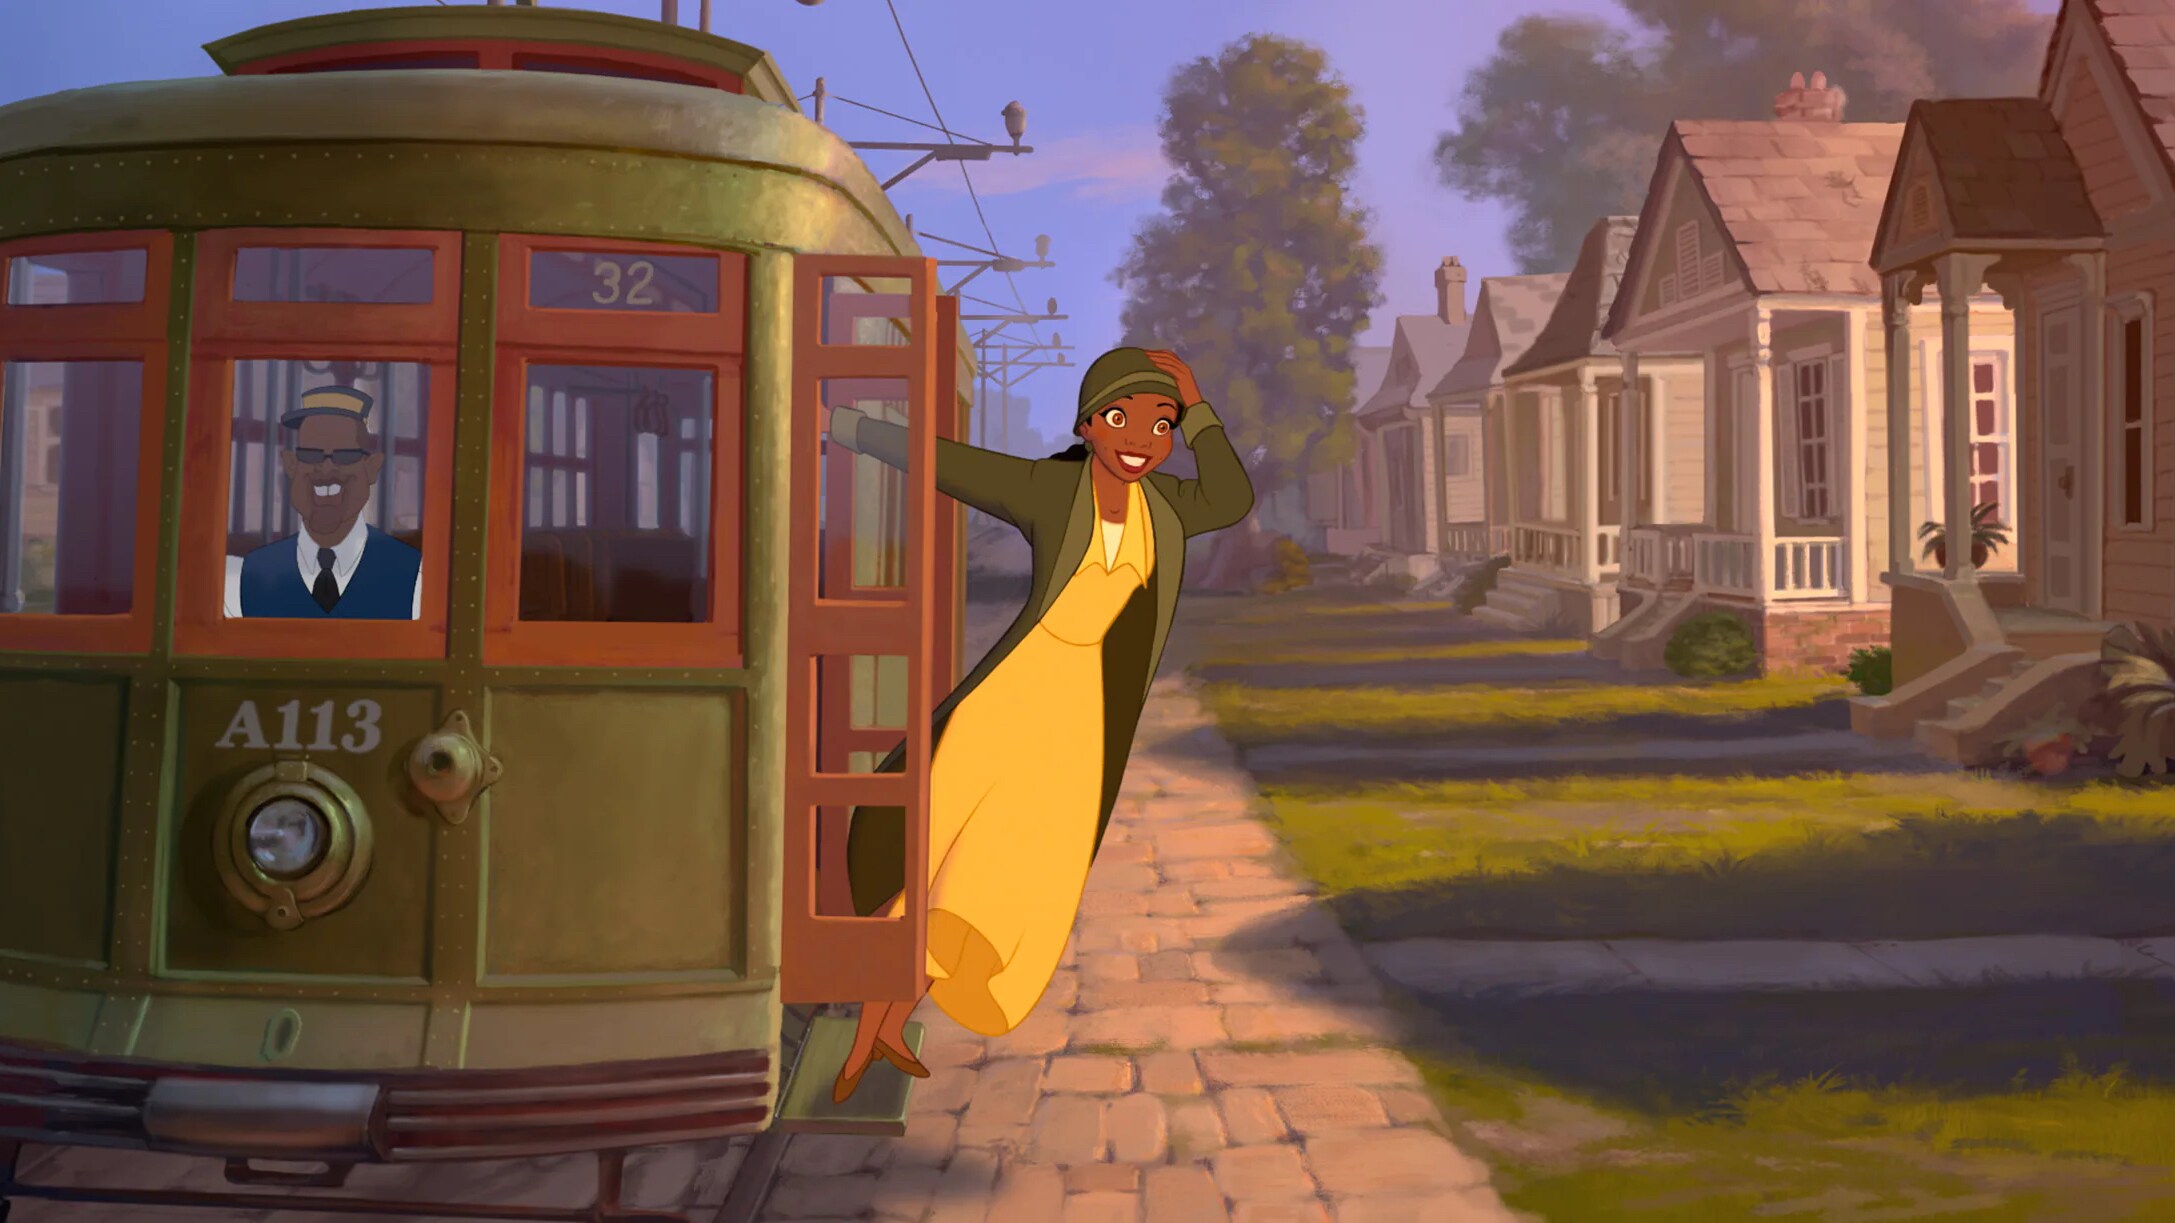 Tiana on her way home after a day of work.